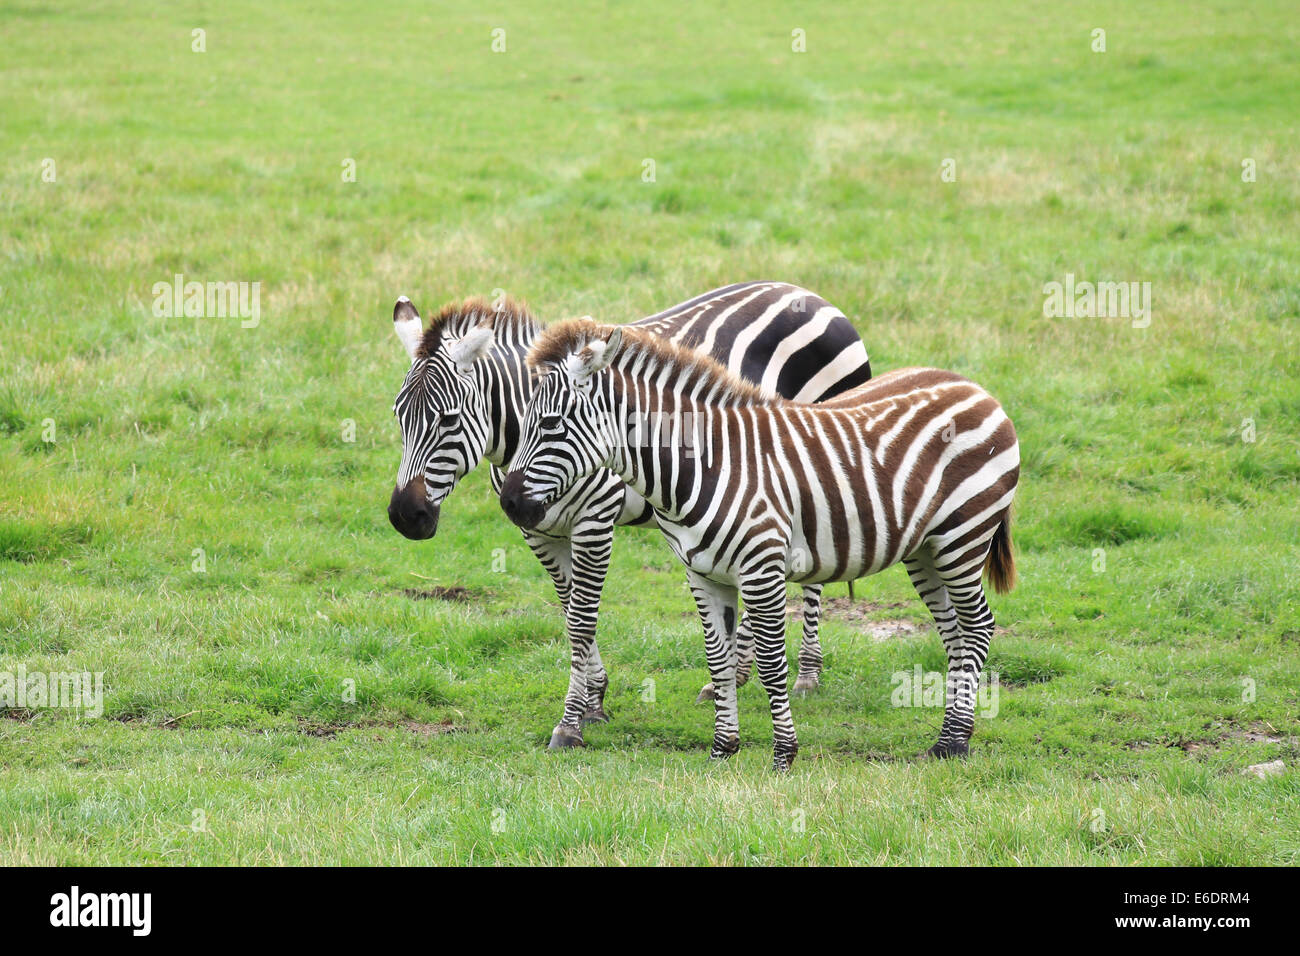 Two zebras stood together on a field of grass. Stock Photo